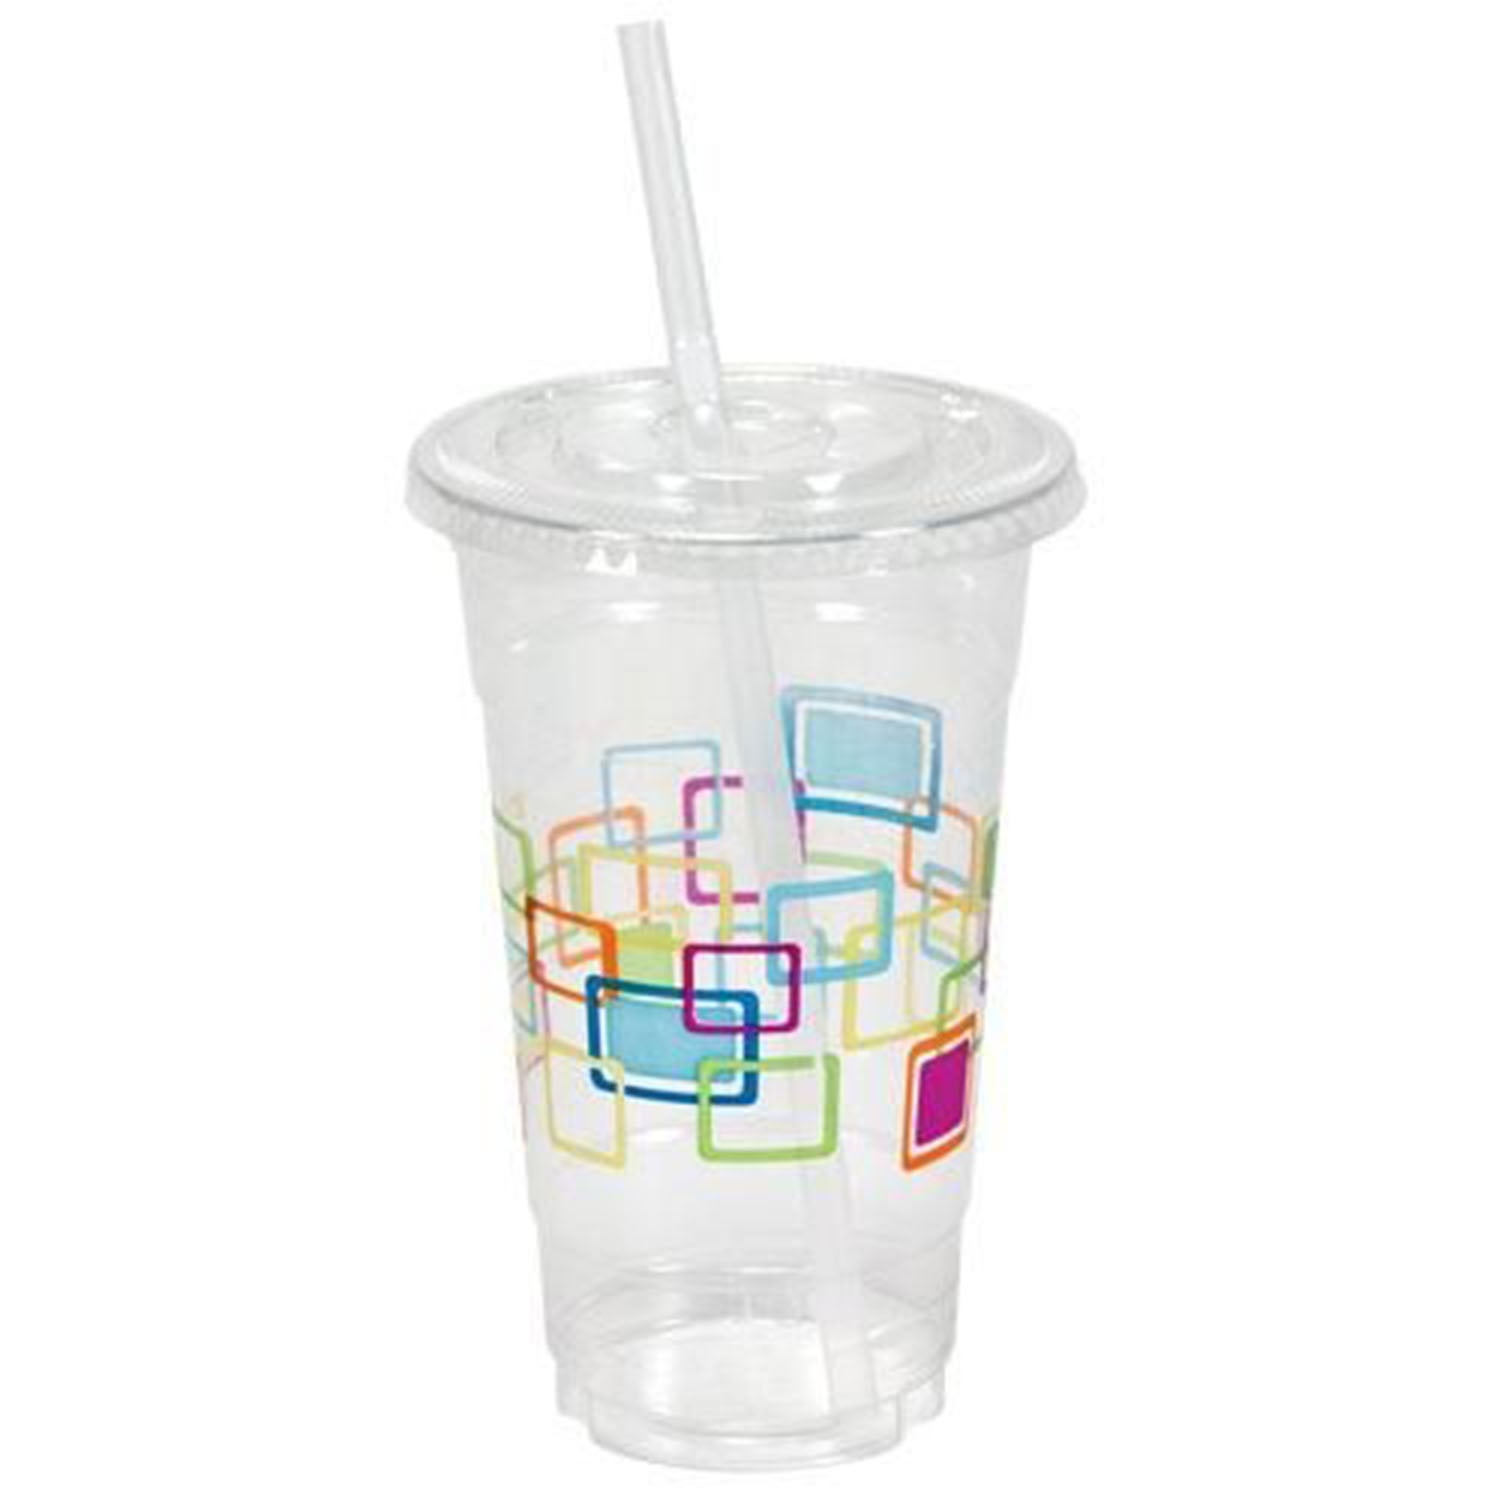 Nicole Home Collection Premium Plastic Deco Cups with Lids and Straws 24 oz 10 Pack